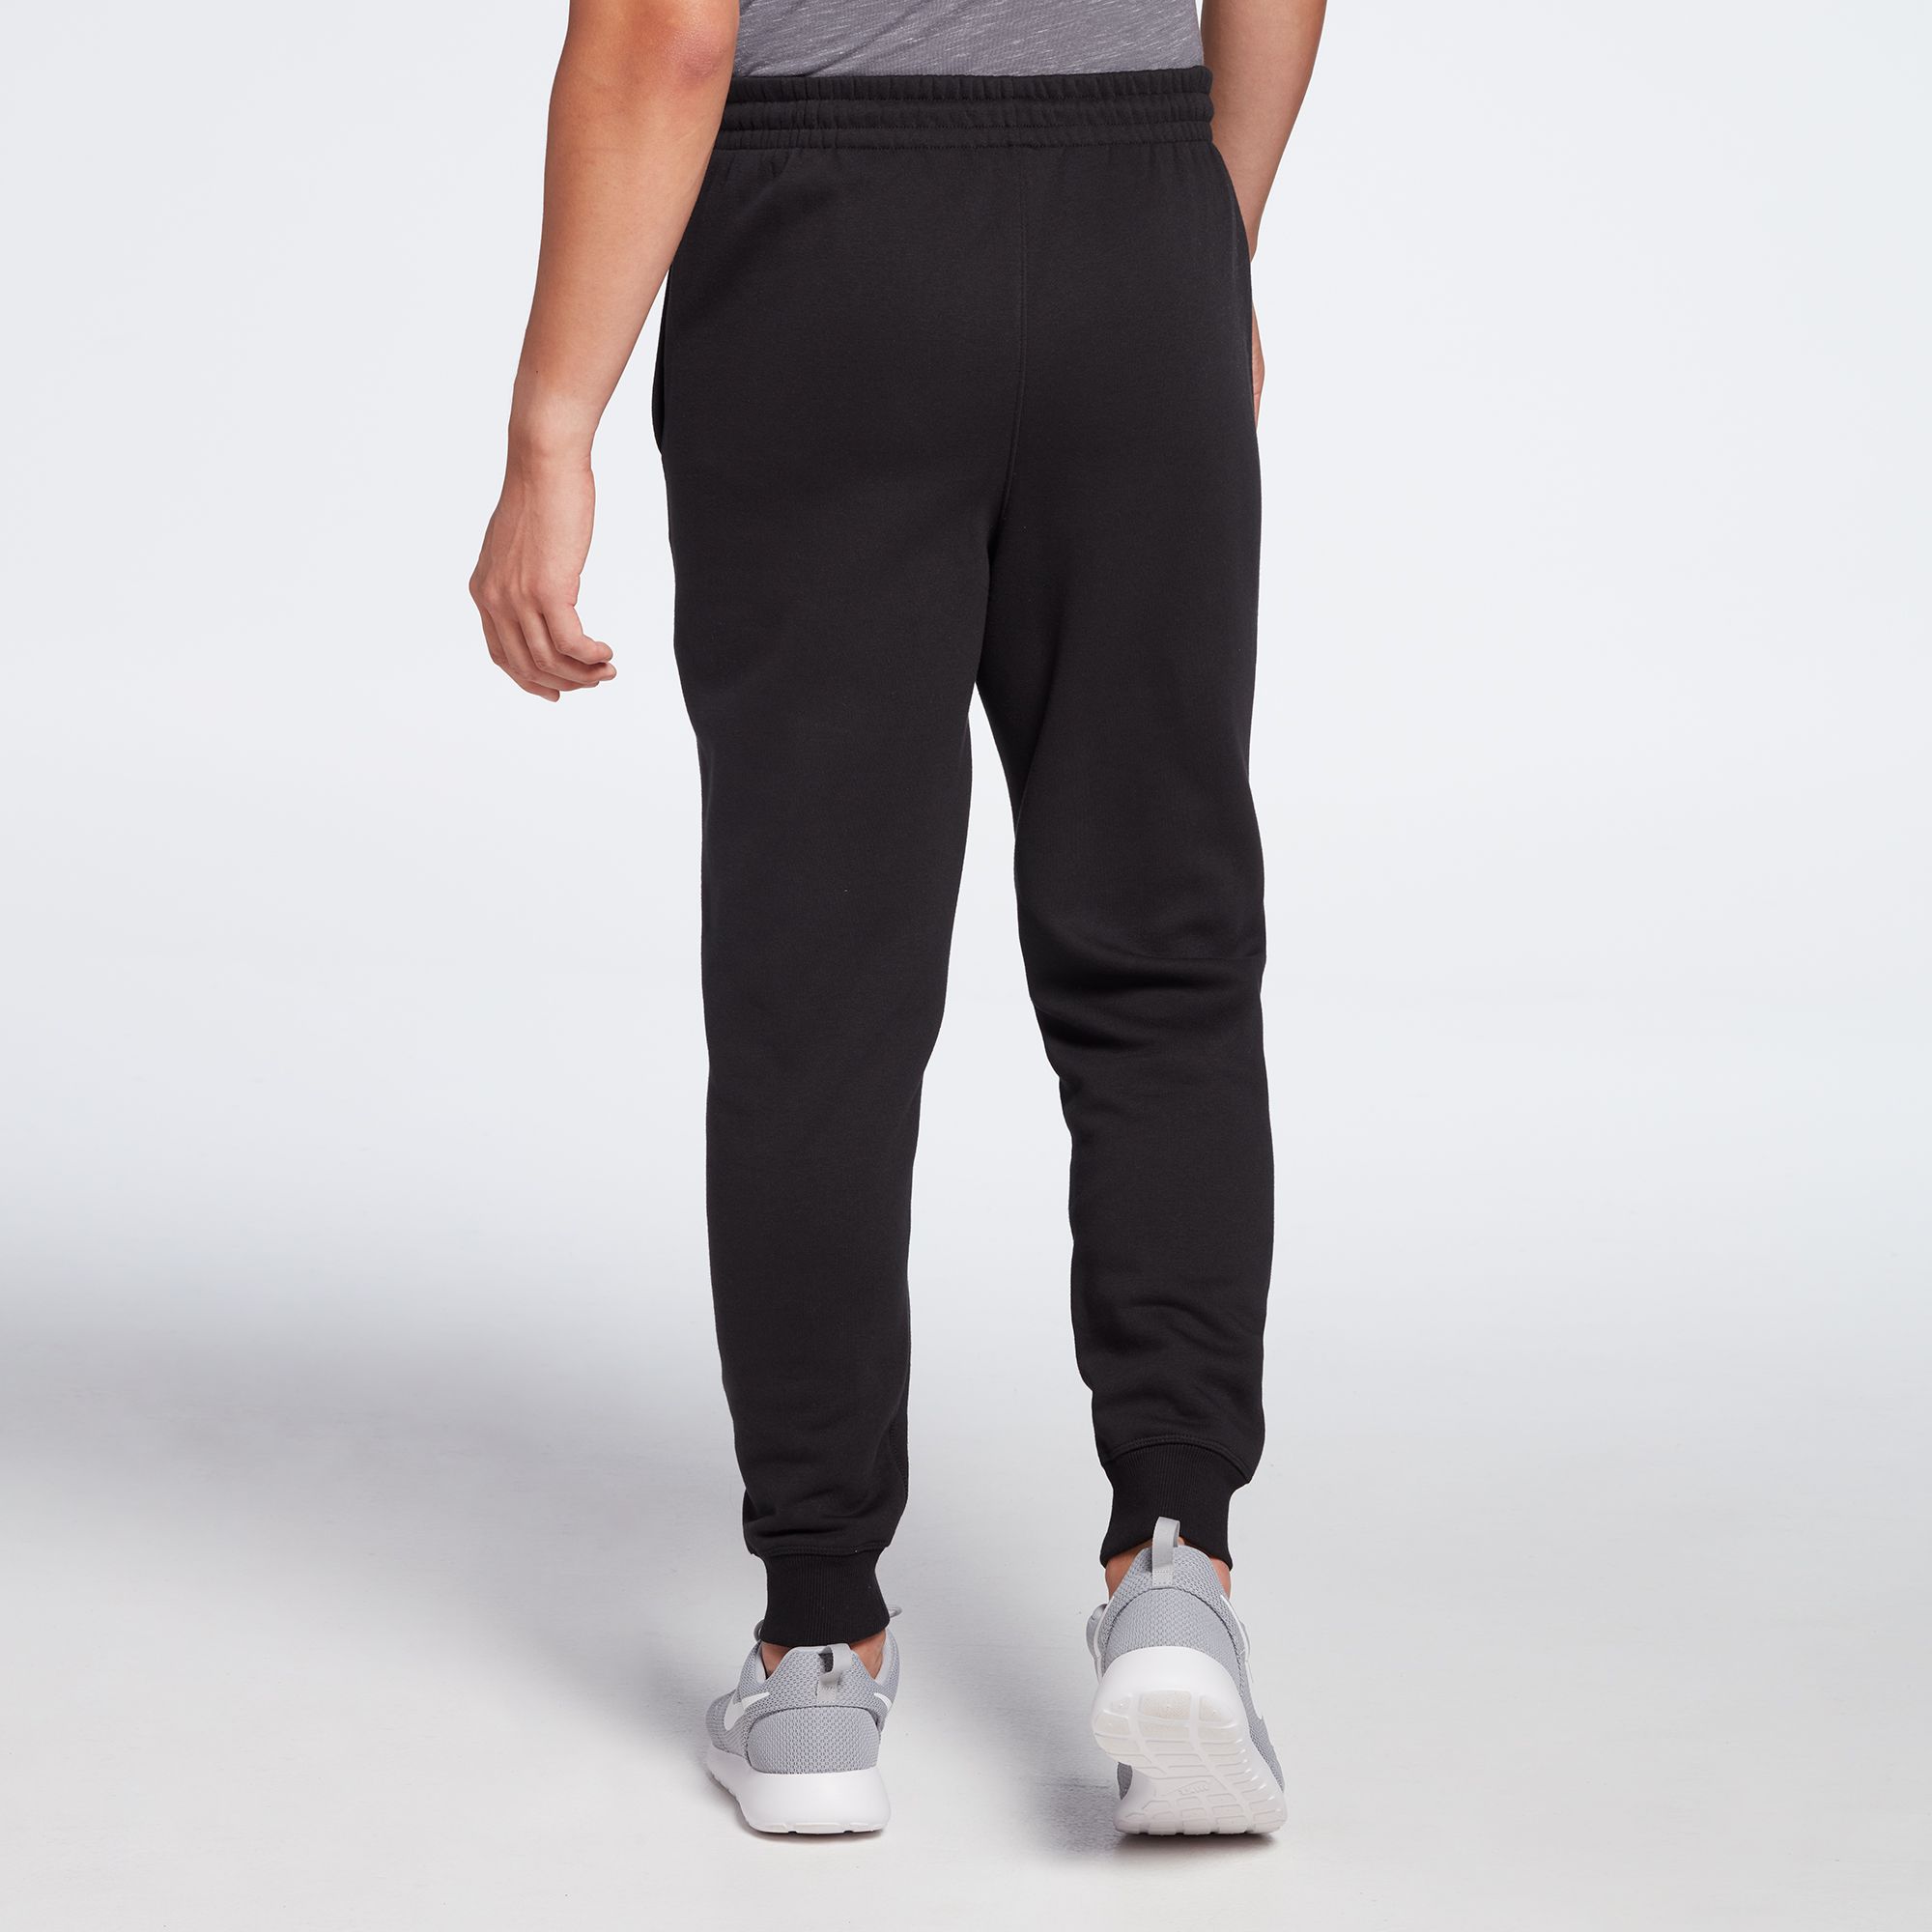 Cotton Workout Pants  DICK's Sporting Goods